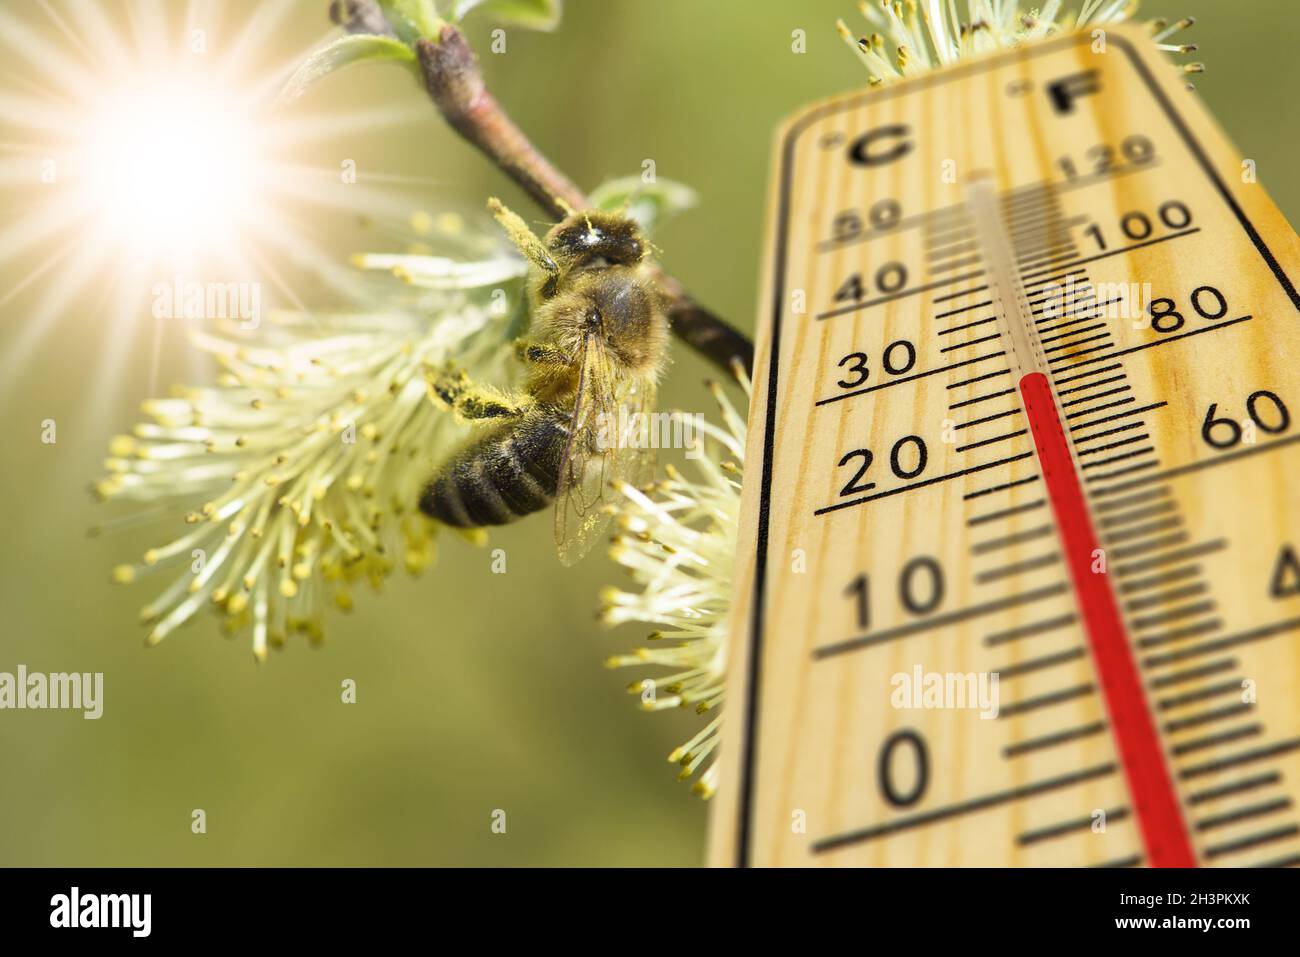 Warm temperature on thermometer at springtime Stock Photo